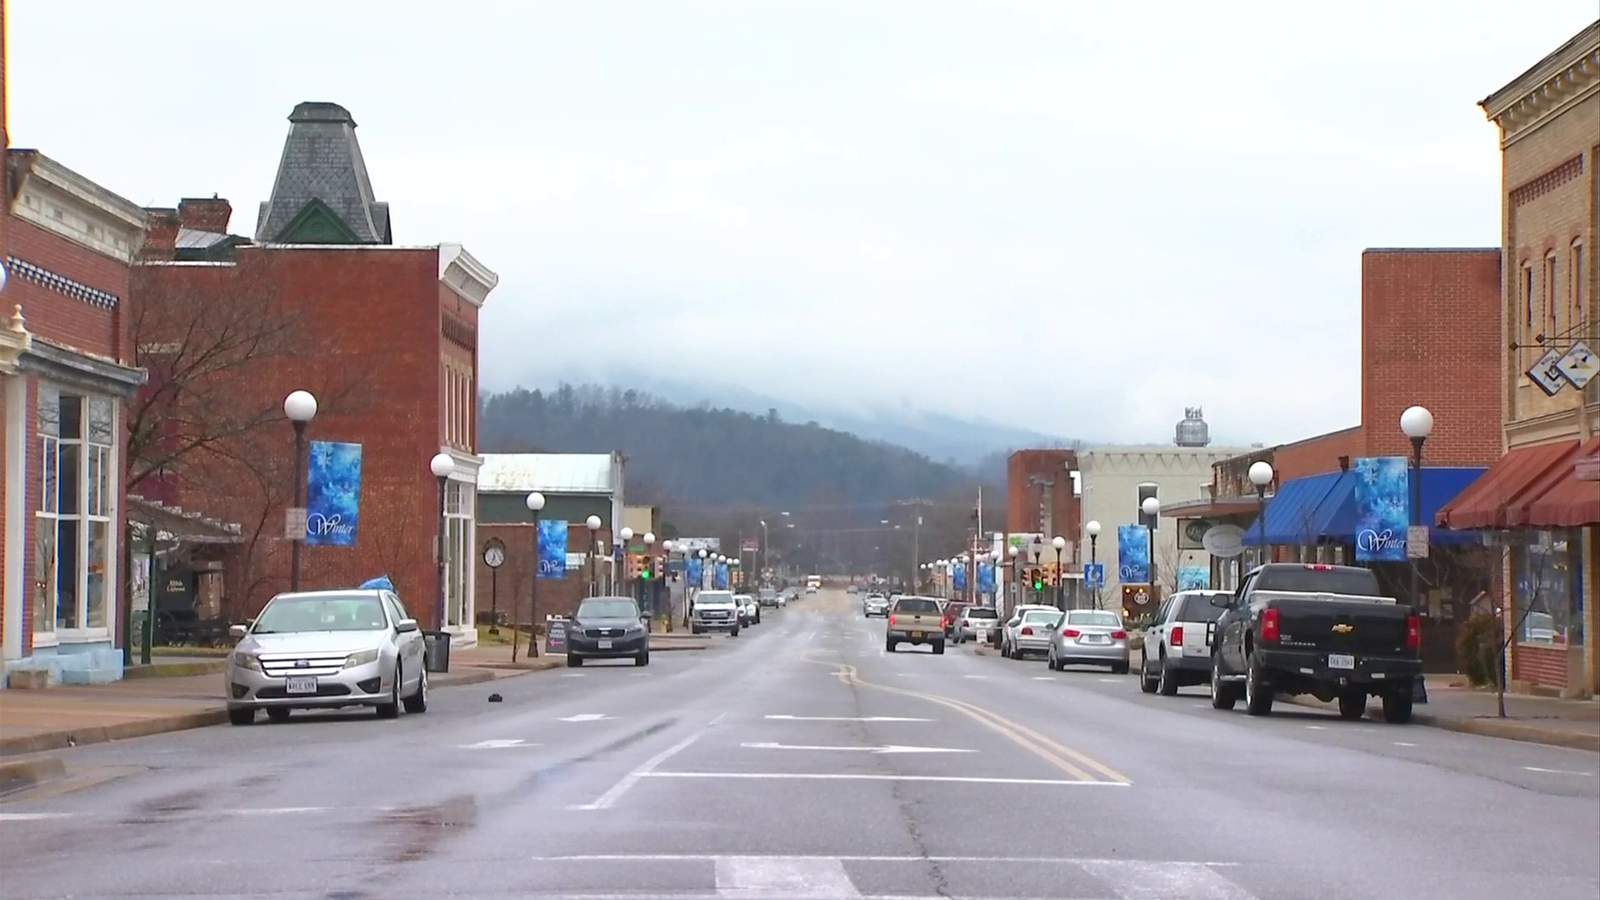 New life in the works for struggling downtown Buena Vista